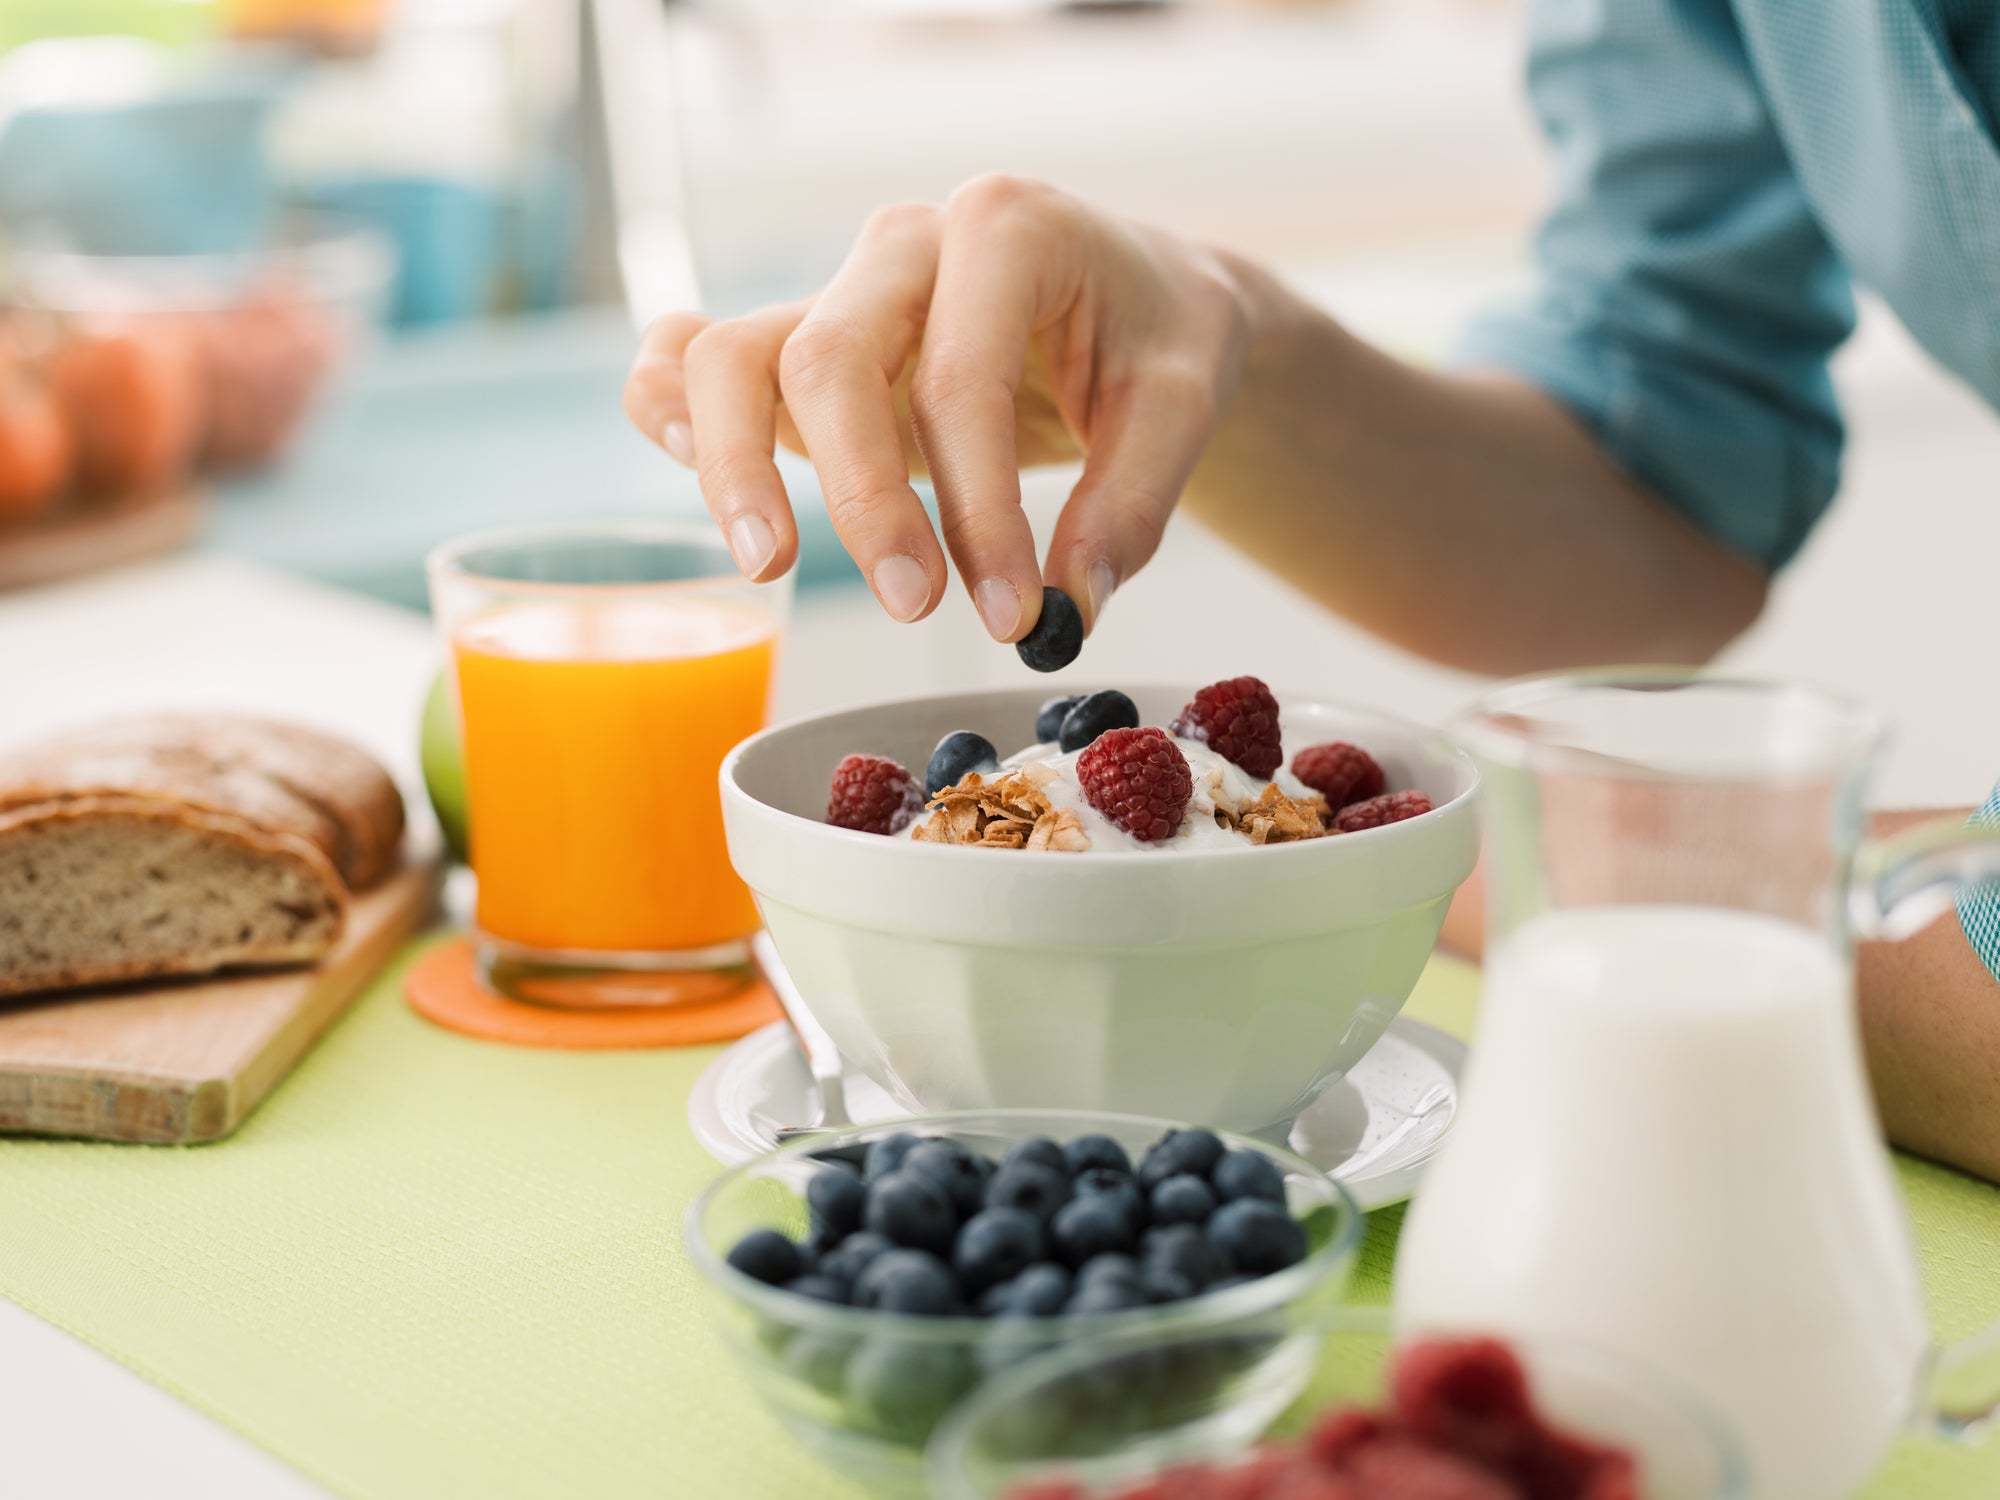 A woman’s hand plucking a blueberry from a healthy pre-workout snack of yogurt, oats and berries. 